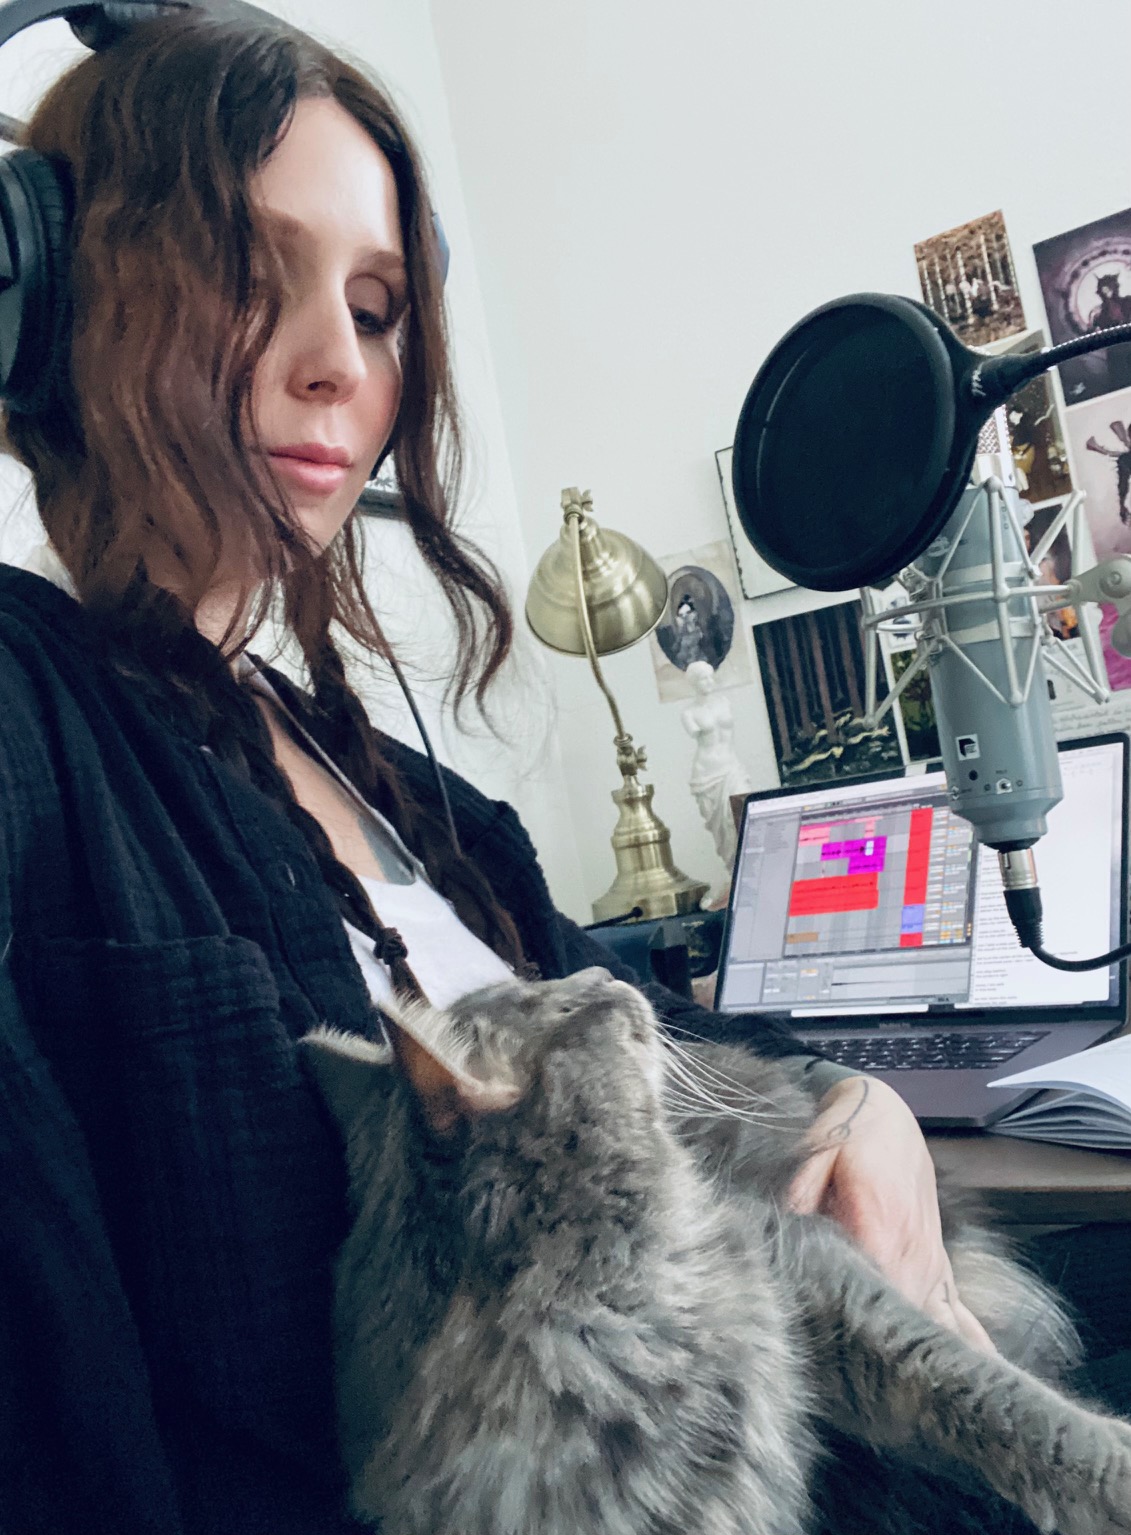 Chelsea Wolfe at her writing desk with her grey cat Wisp on her lap